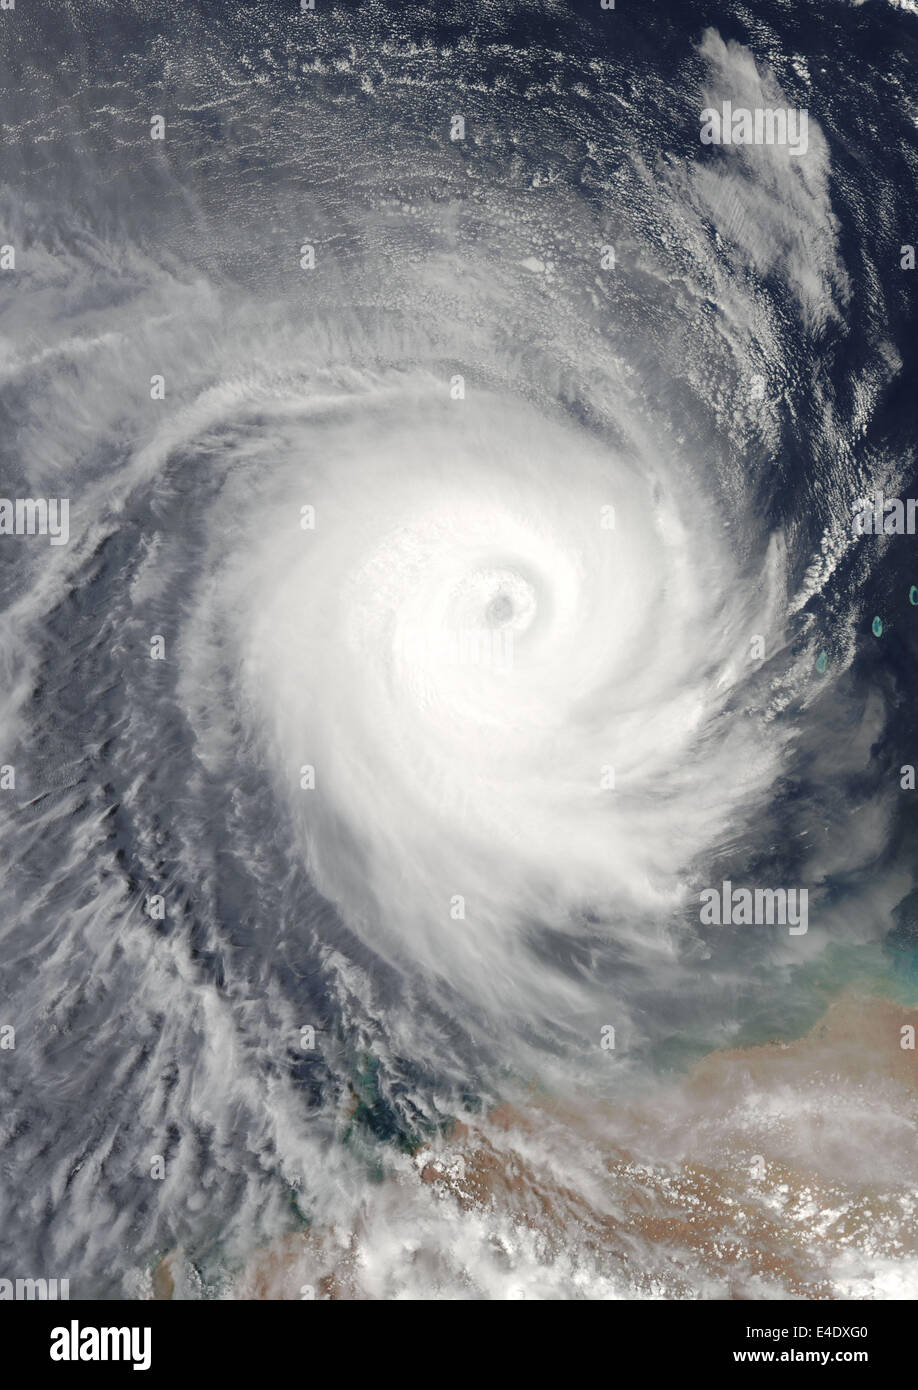 Cyclone Billy, Australia, In 2008, True Colour Satellite Image. Tropical Cyclone Billy over the Indian Ocean, off the coast of W Stock Photo